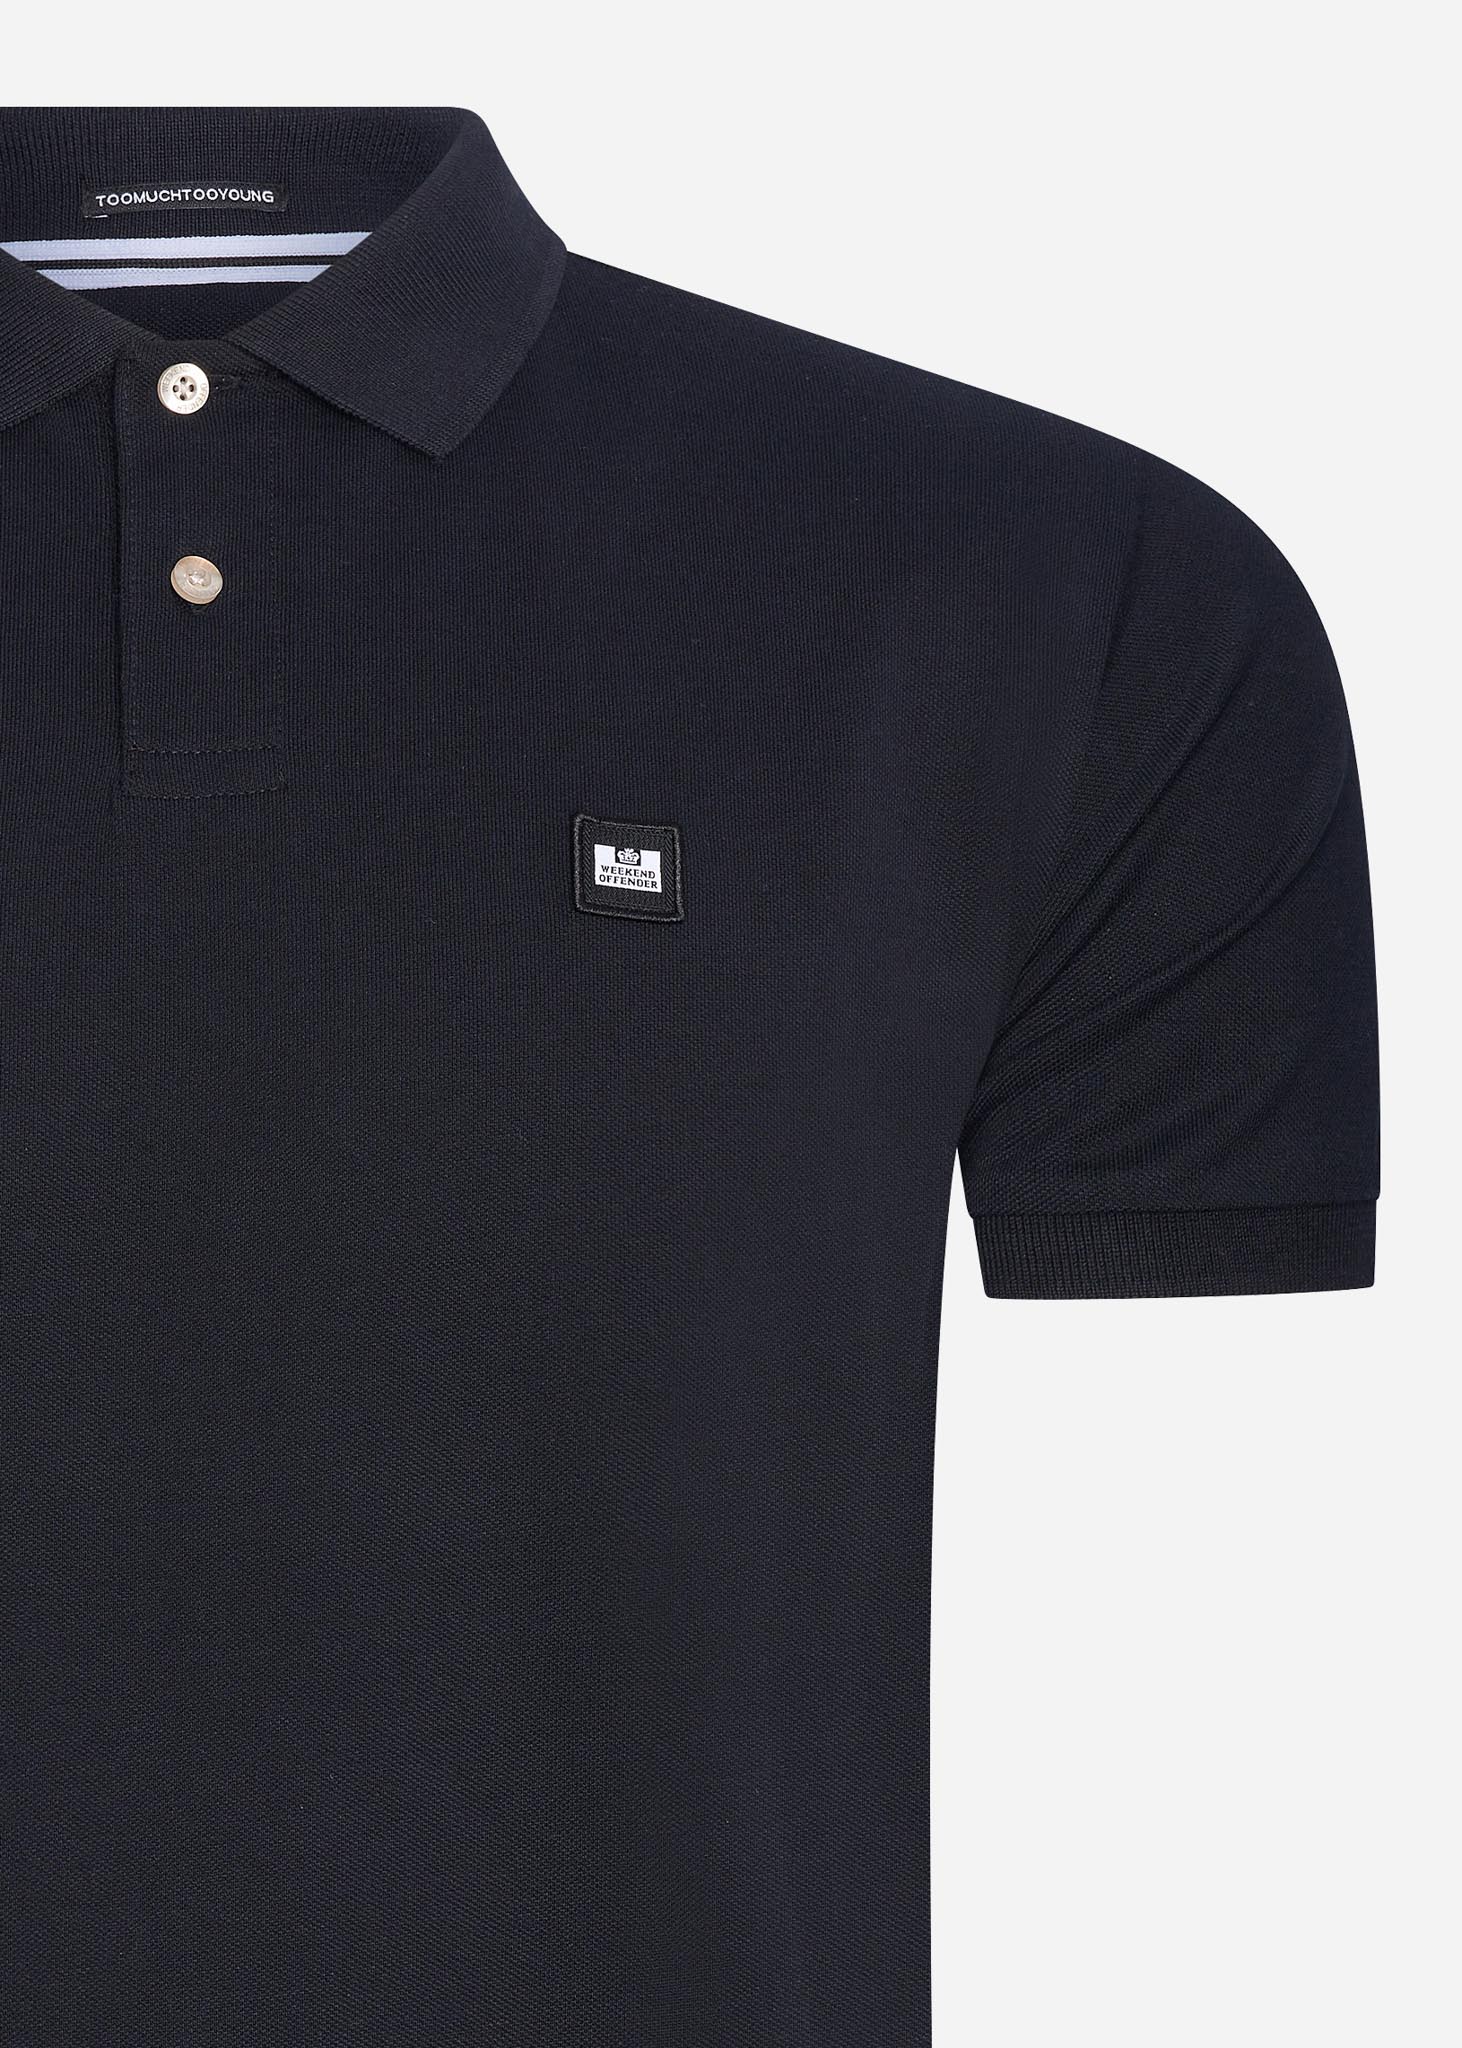 weekend offender polo black